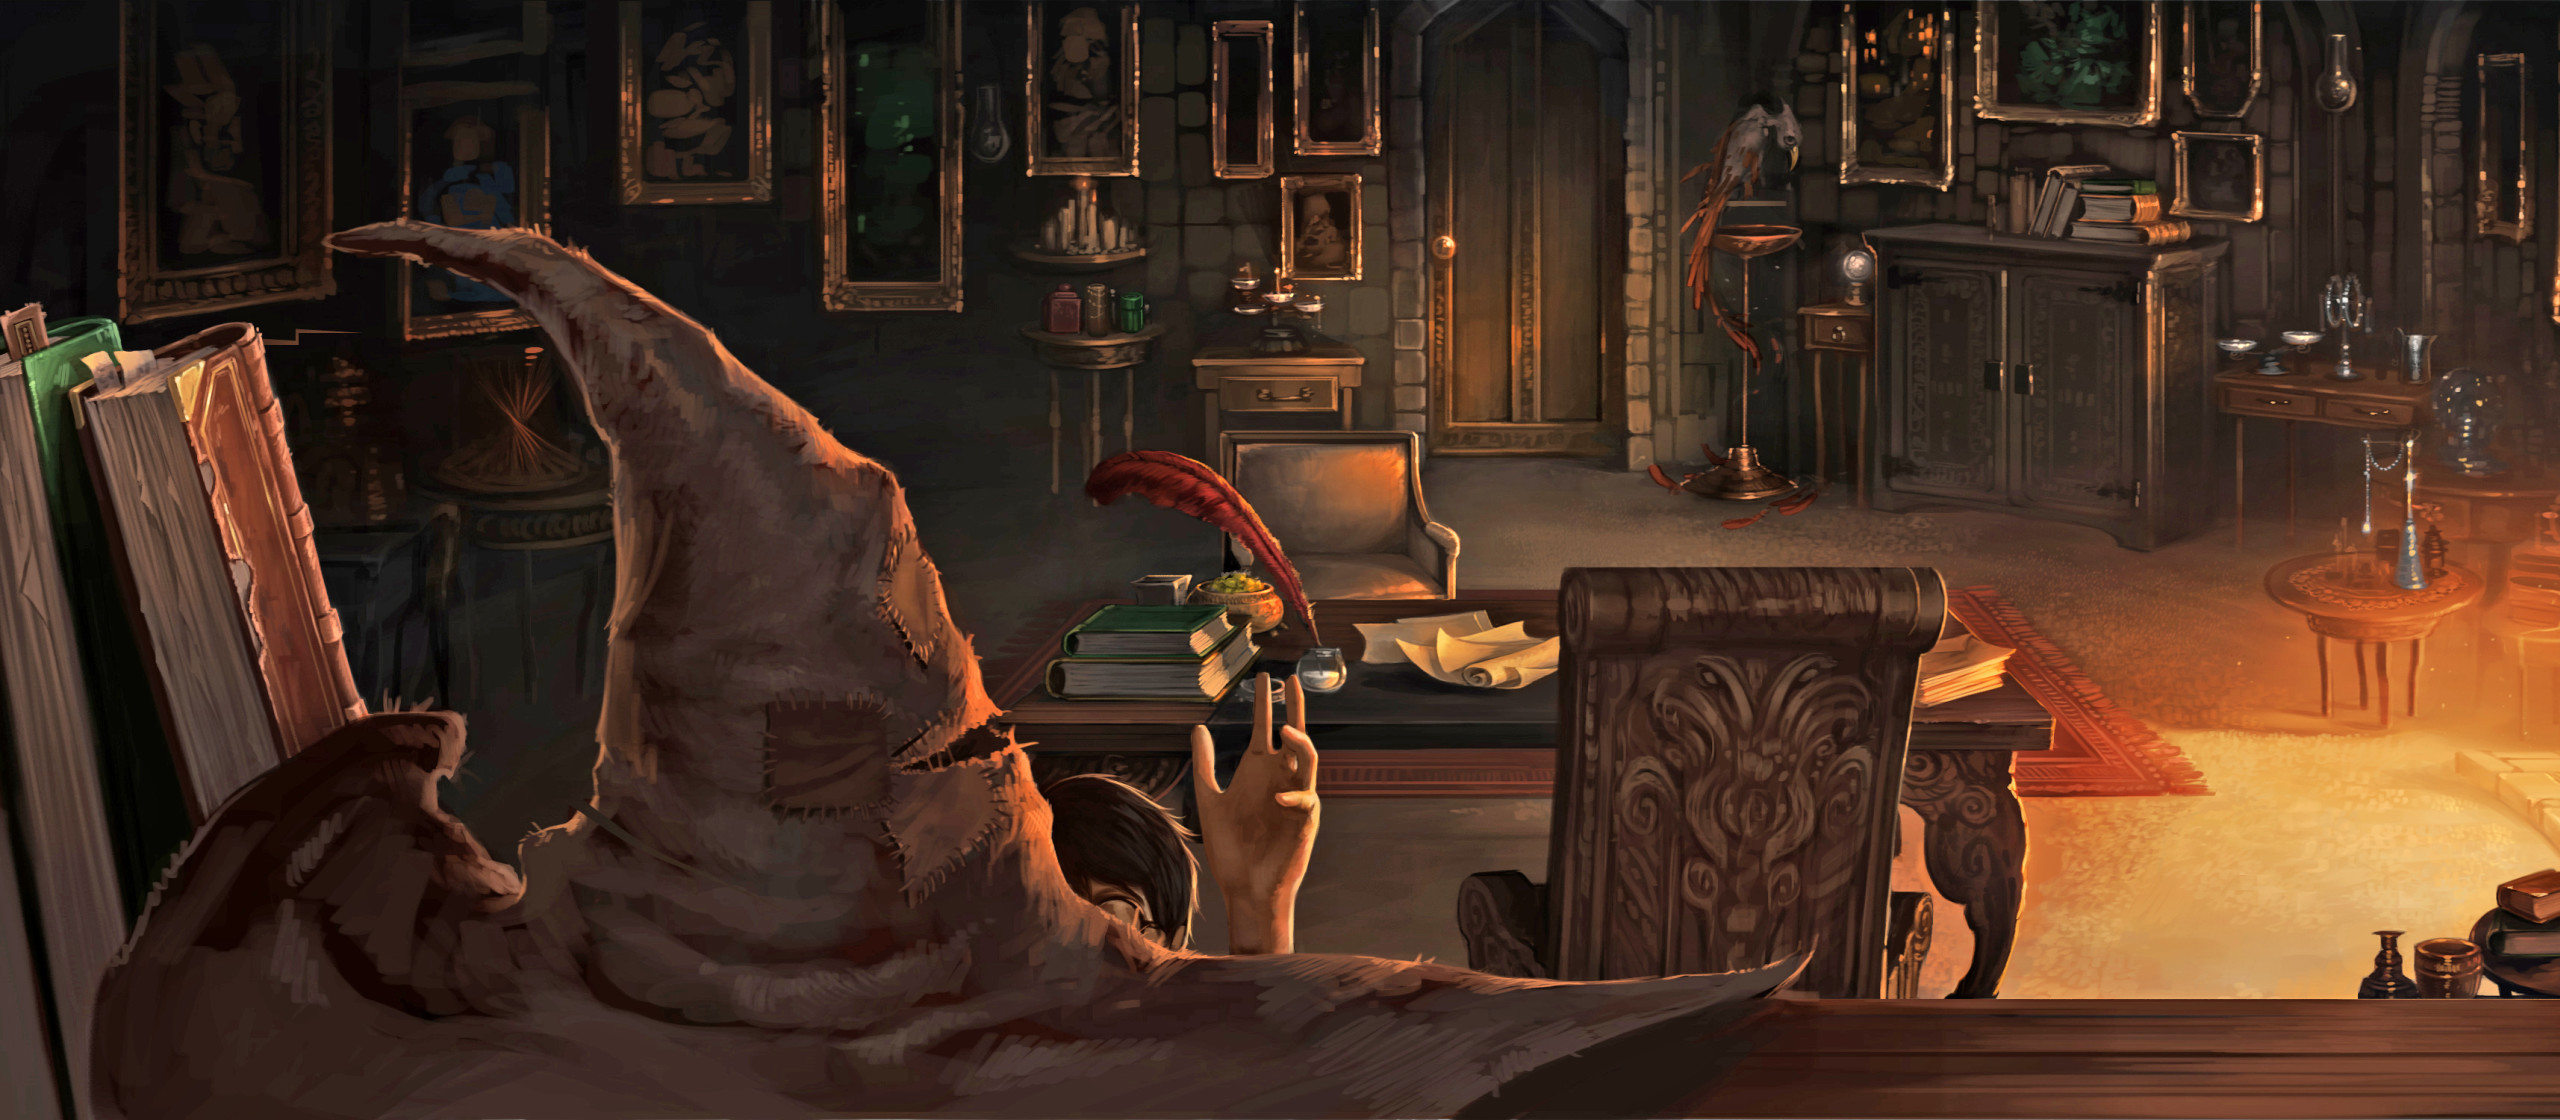 Dumbledore's Office by Atomhawk